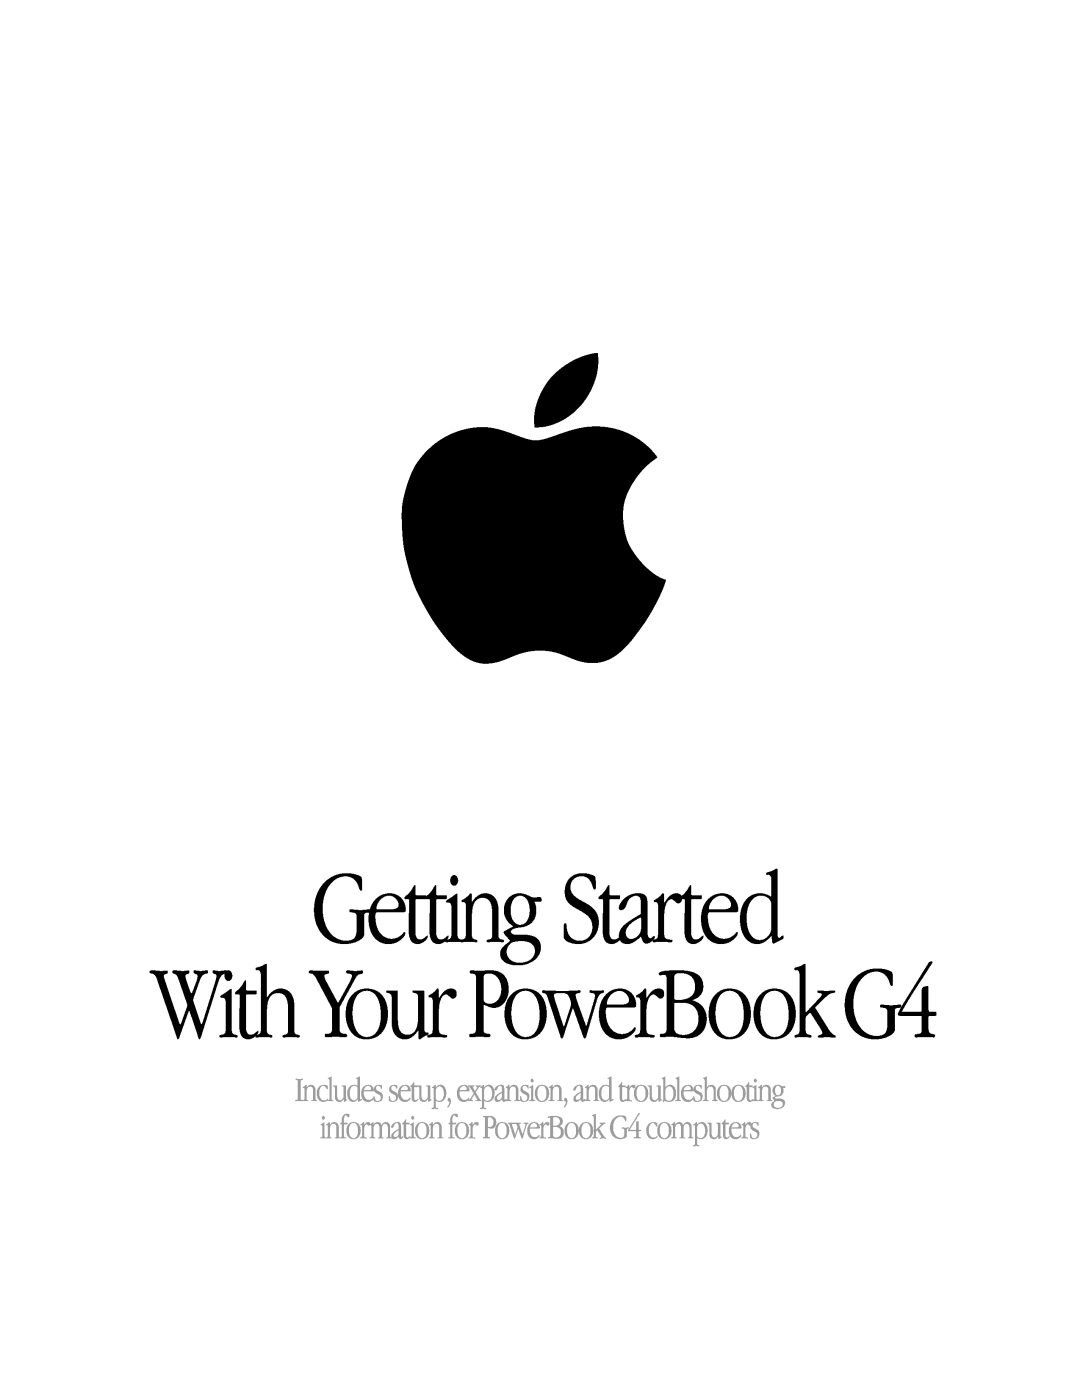 Apple powerbook g4 manual Getting Started, With Your PowerBook G4, information for PowerBook G4 computers 